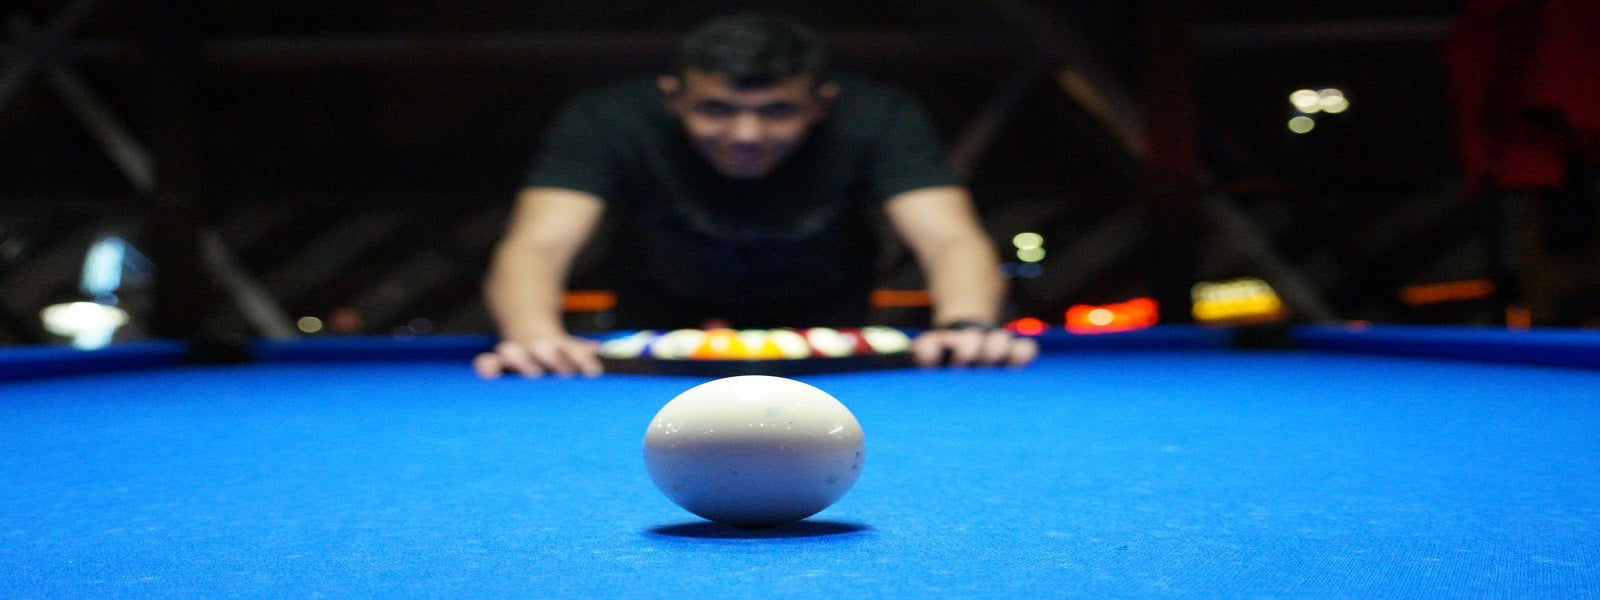 image of a pool player over table - absolute cues